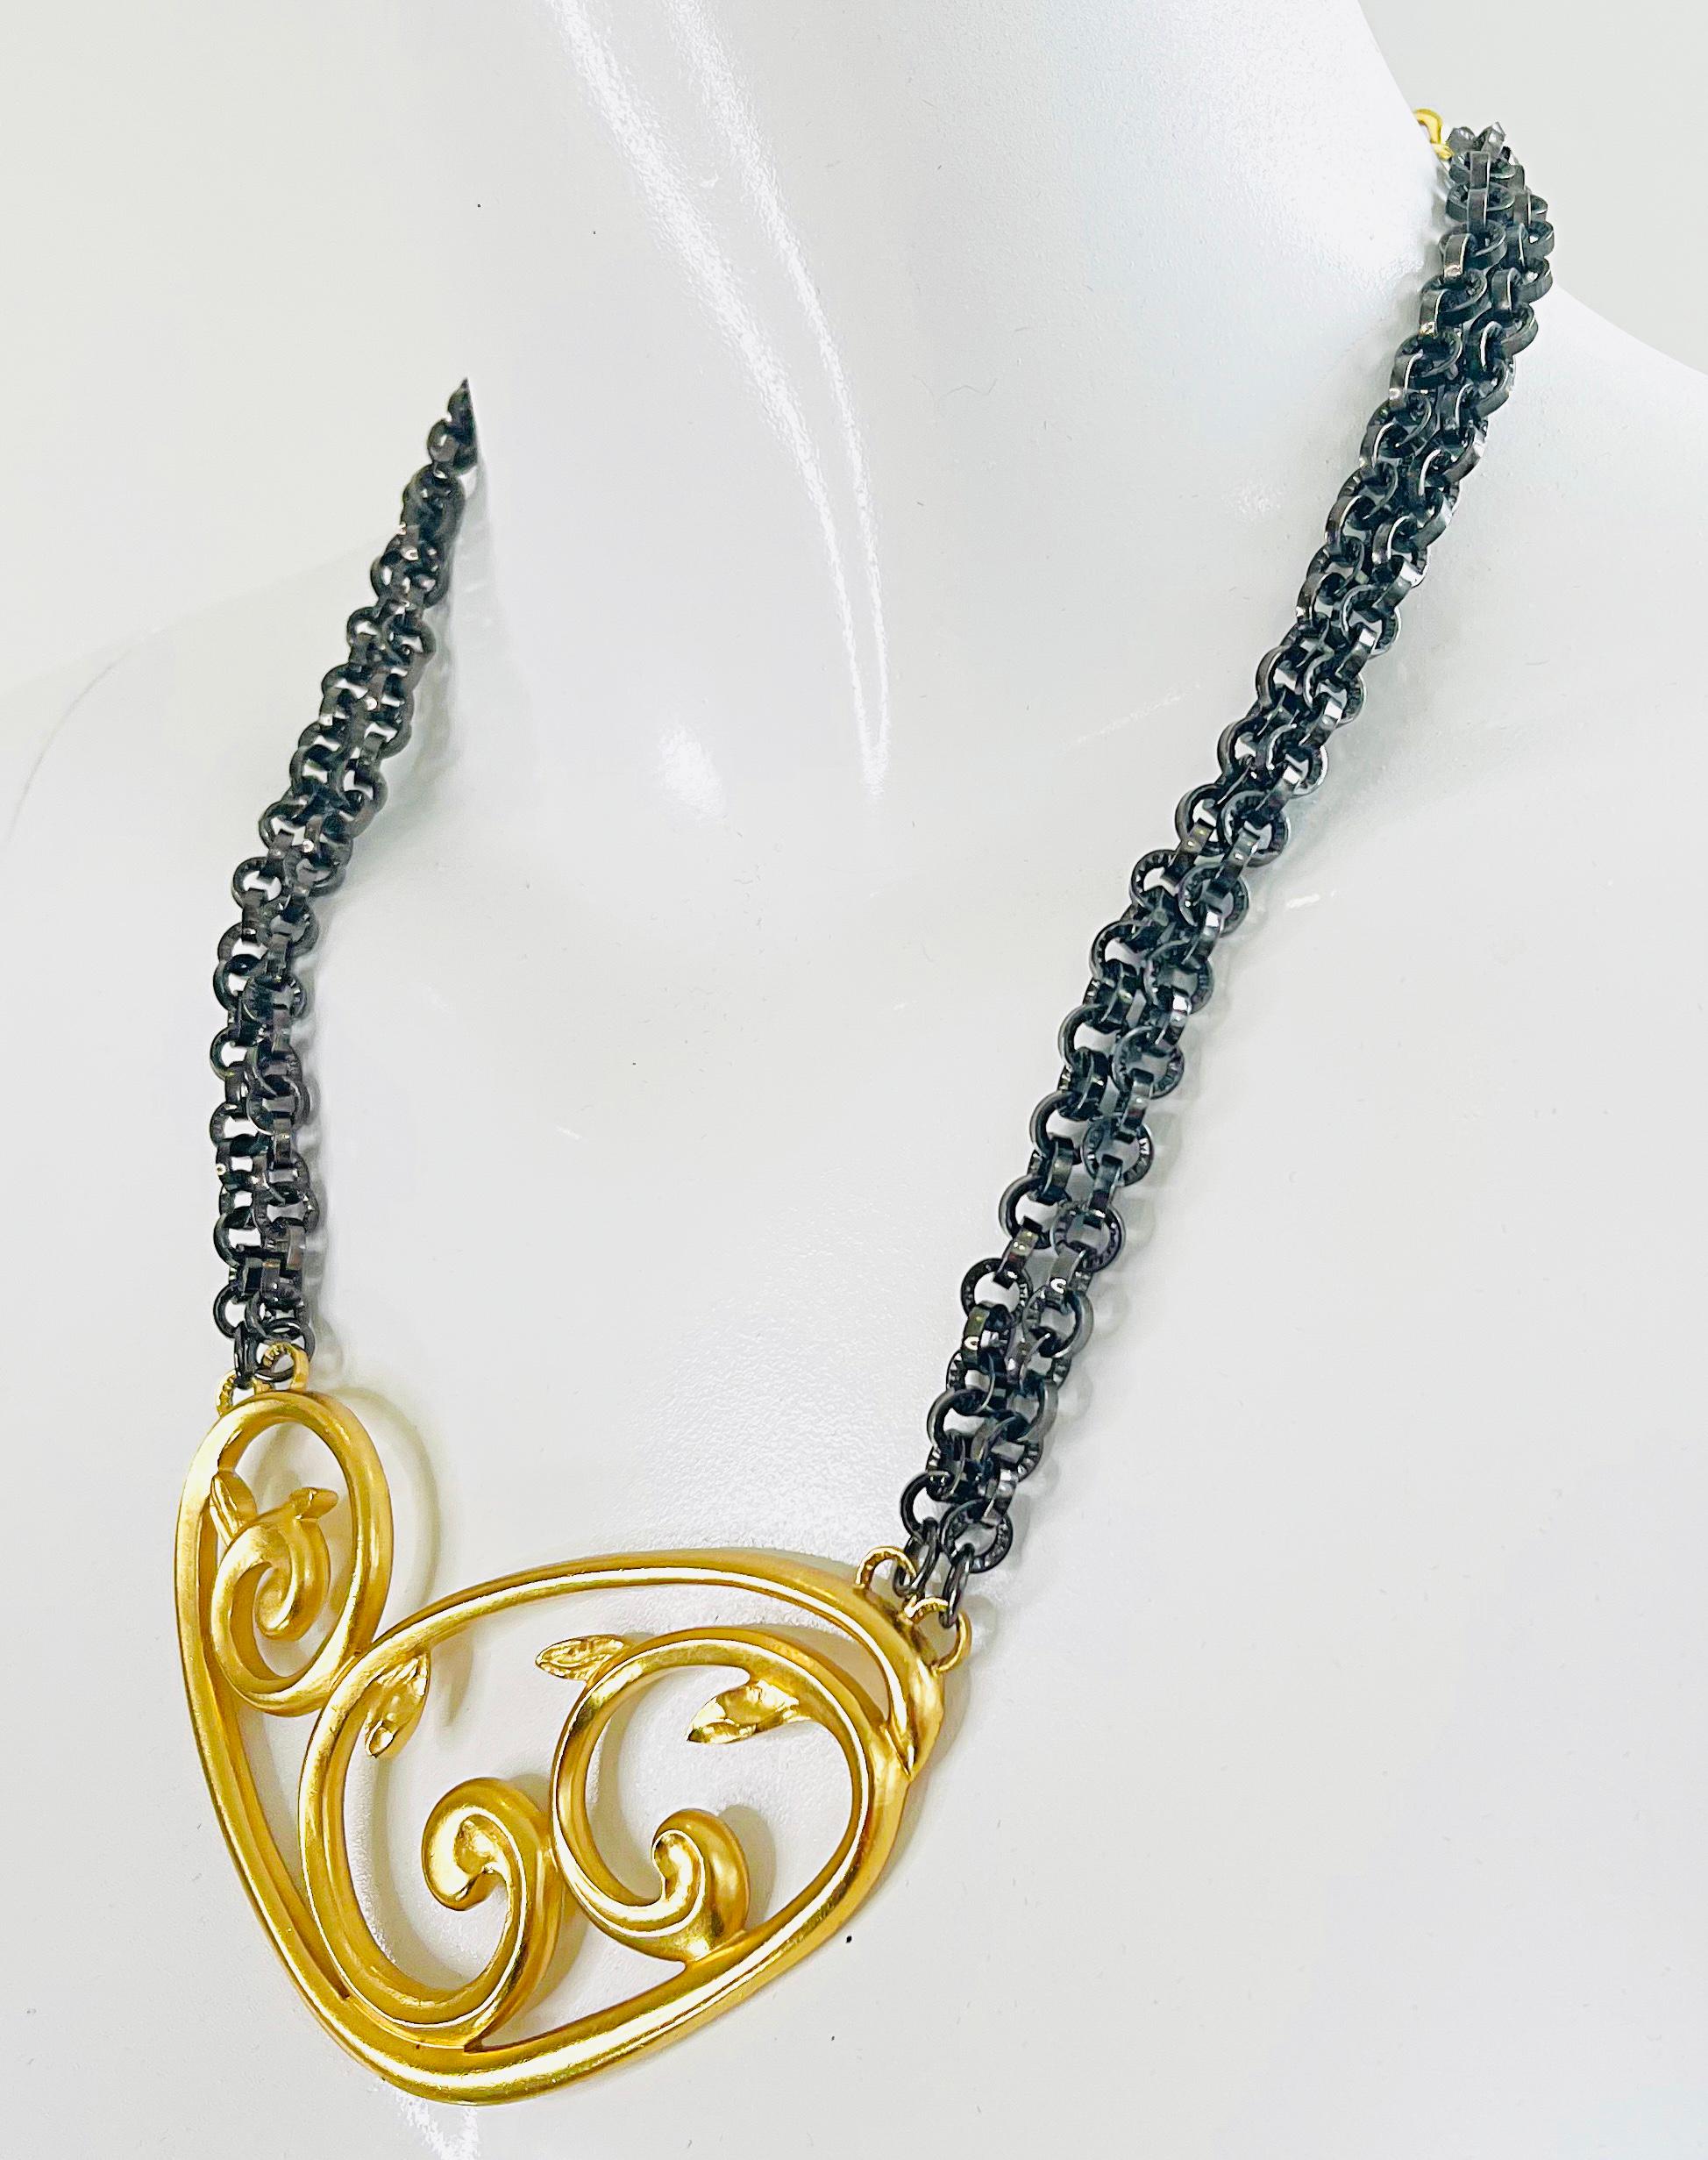 Women's YVES SAINT LAURENT by Robert Goossens Limited Edition 1980s Two Tone Necklace  For Sale